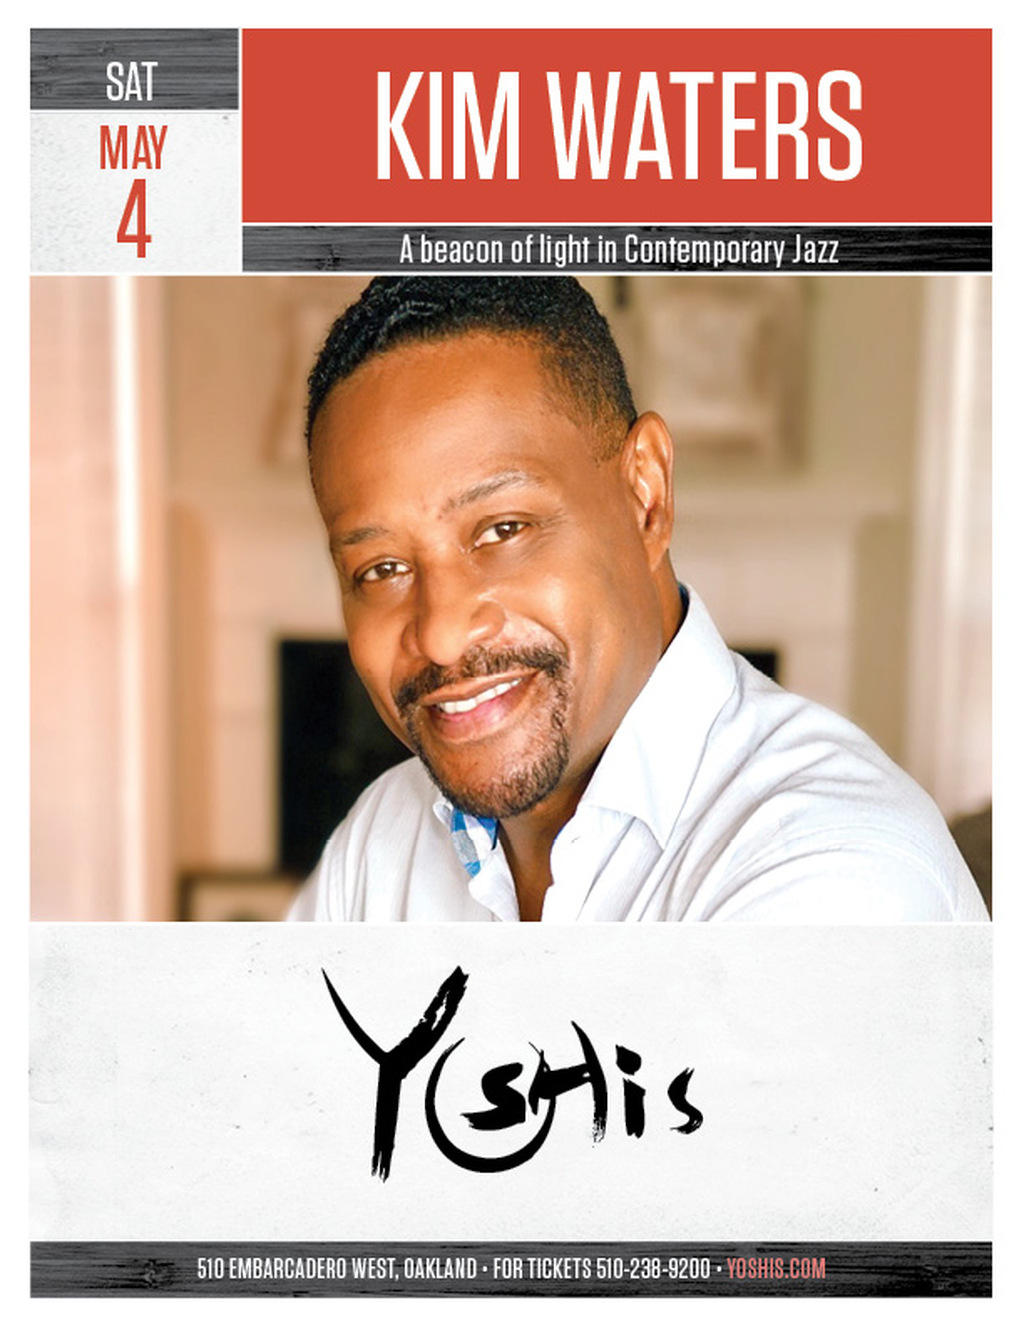 Yoshi s A beacon of light in Contemporary Jazz   SAT MAY KIM WATERS at Yoshi s promotion flier on Digifli com